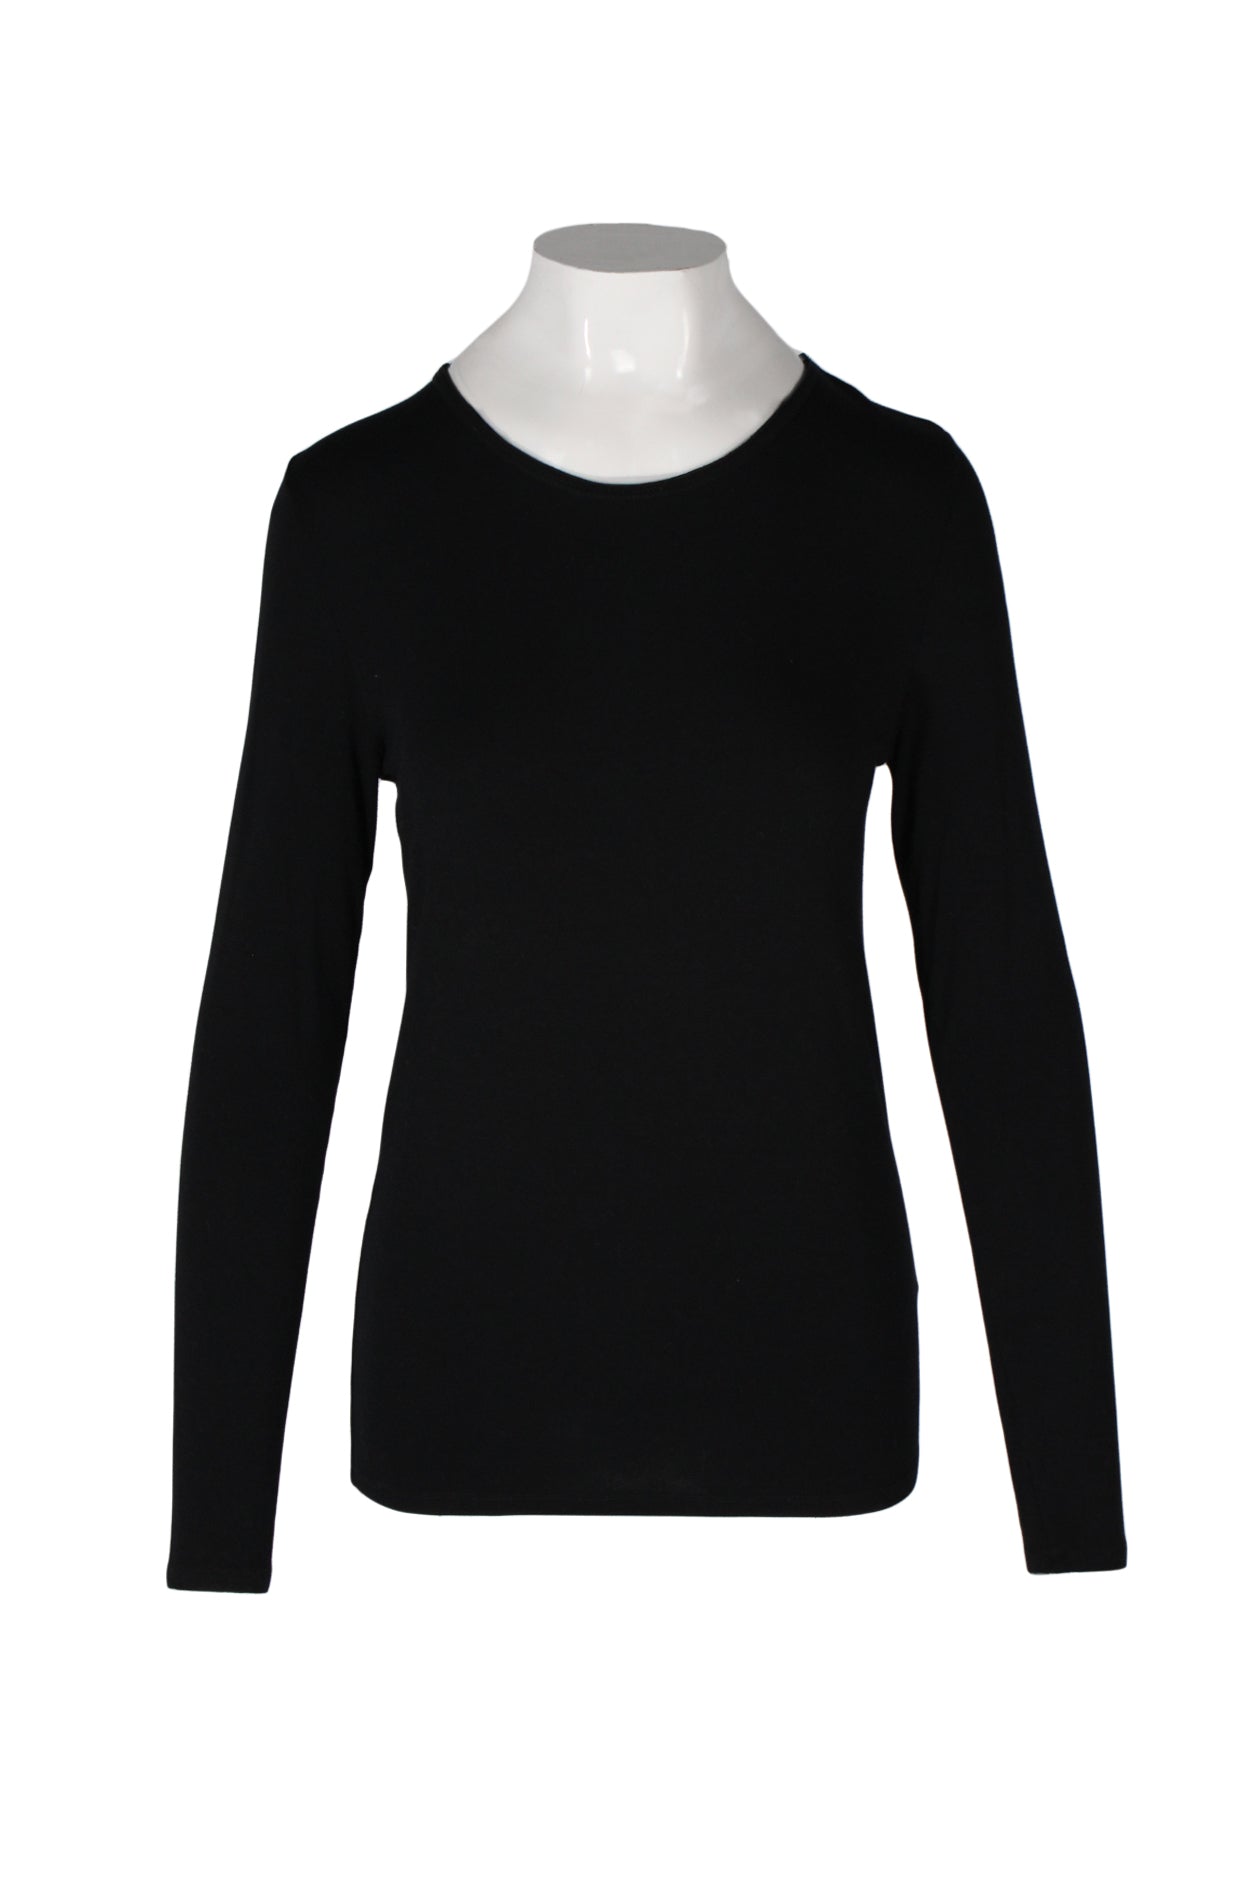 front angle majestic paris black long sleeve t-shirt on feminine mannequin torso featuring round neckline and longline silhouette. 